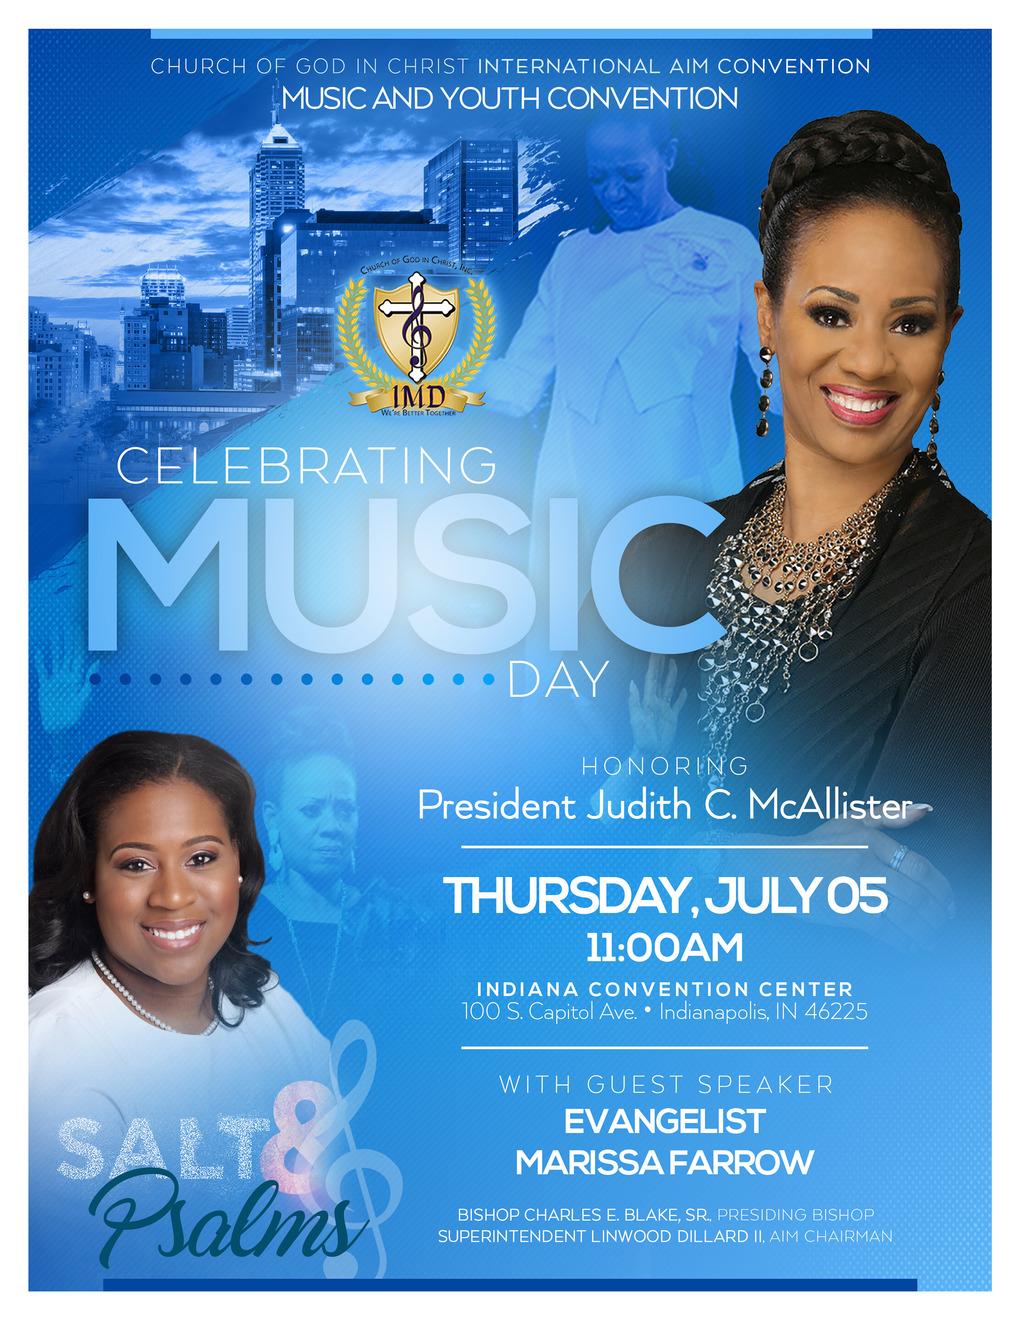 Led by world renowned recording artist and the First Lady of Praise and Worship herself, Dr.